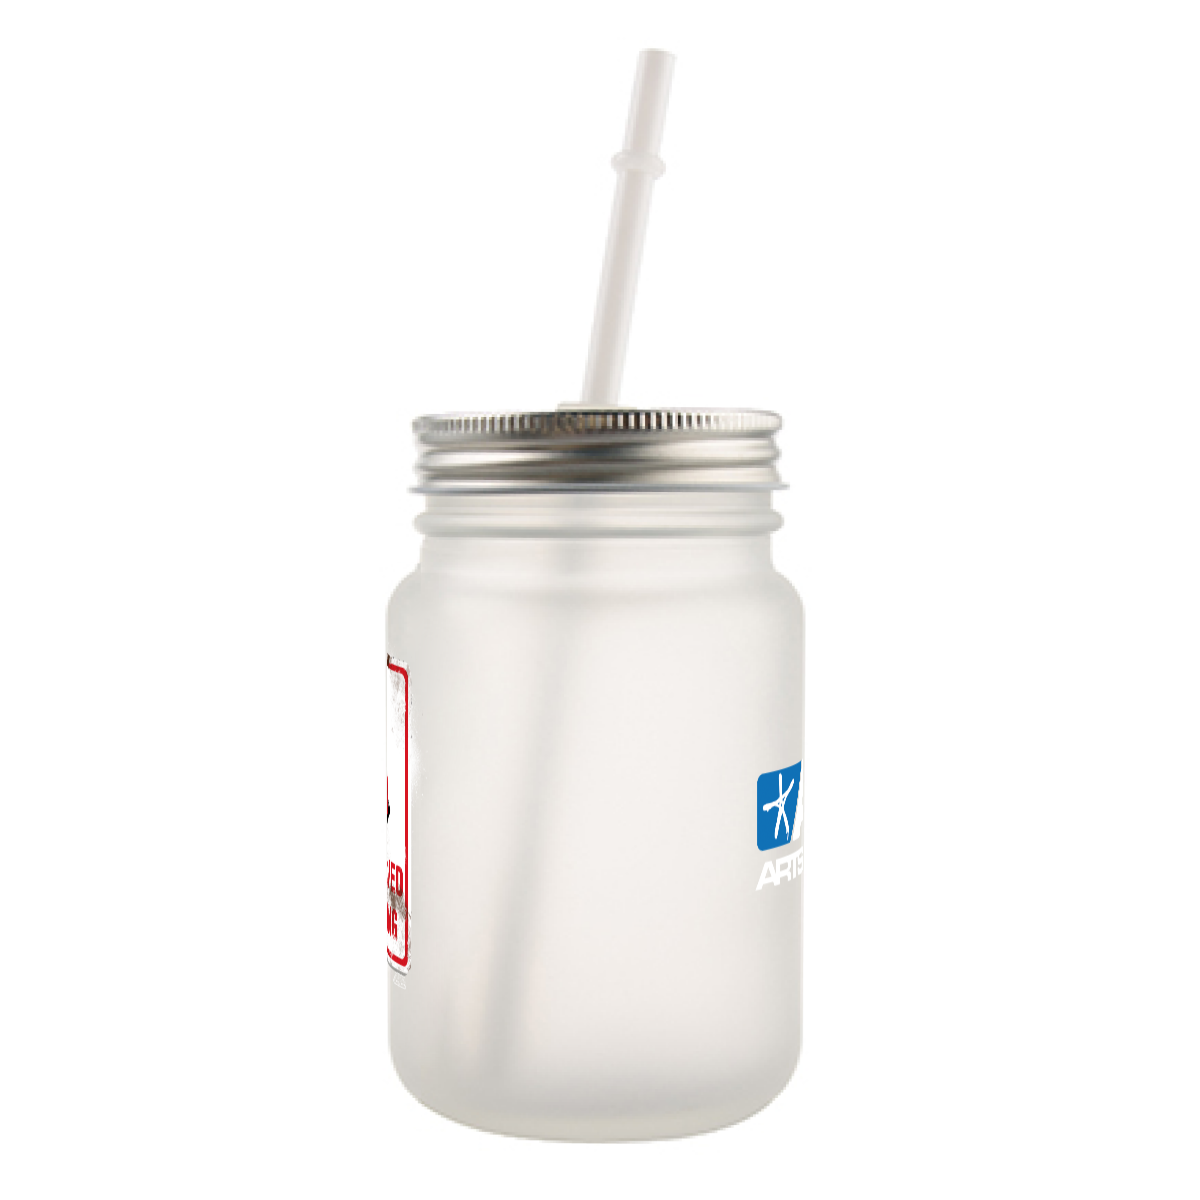 Reserved Parking Frosted glass mason jar with handle